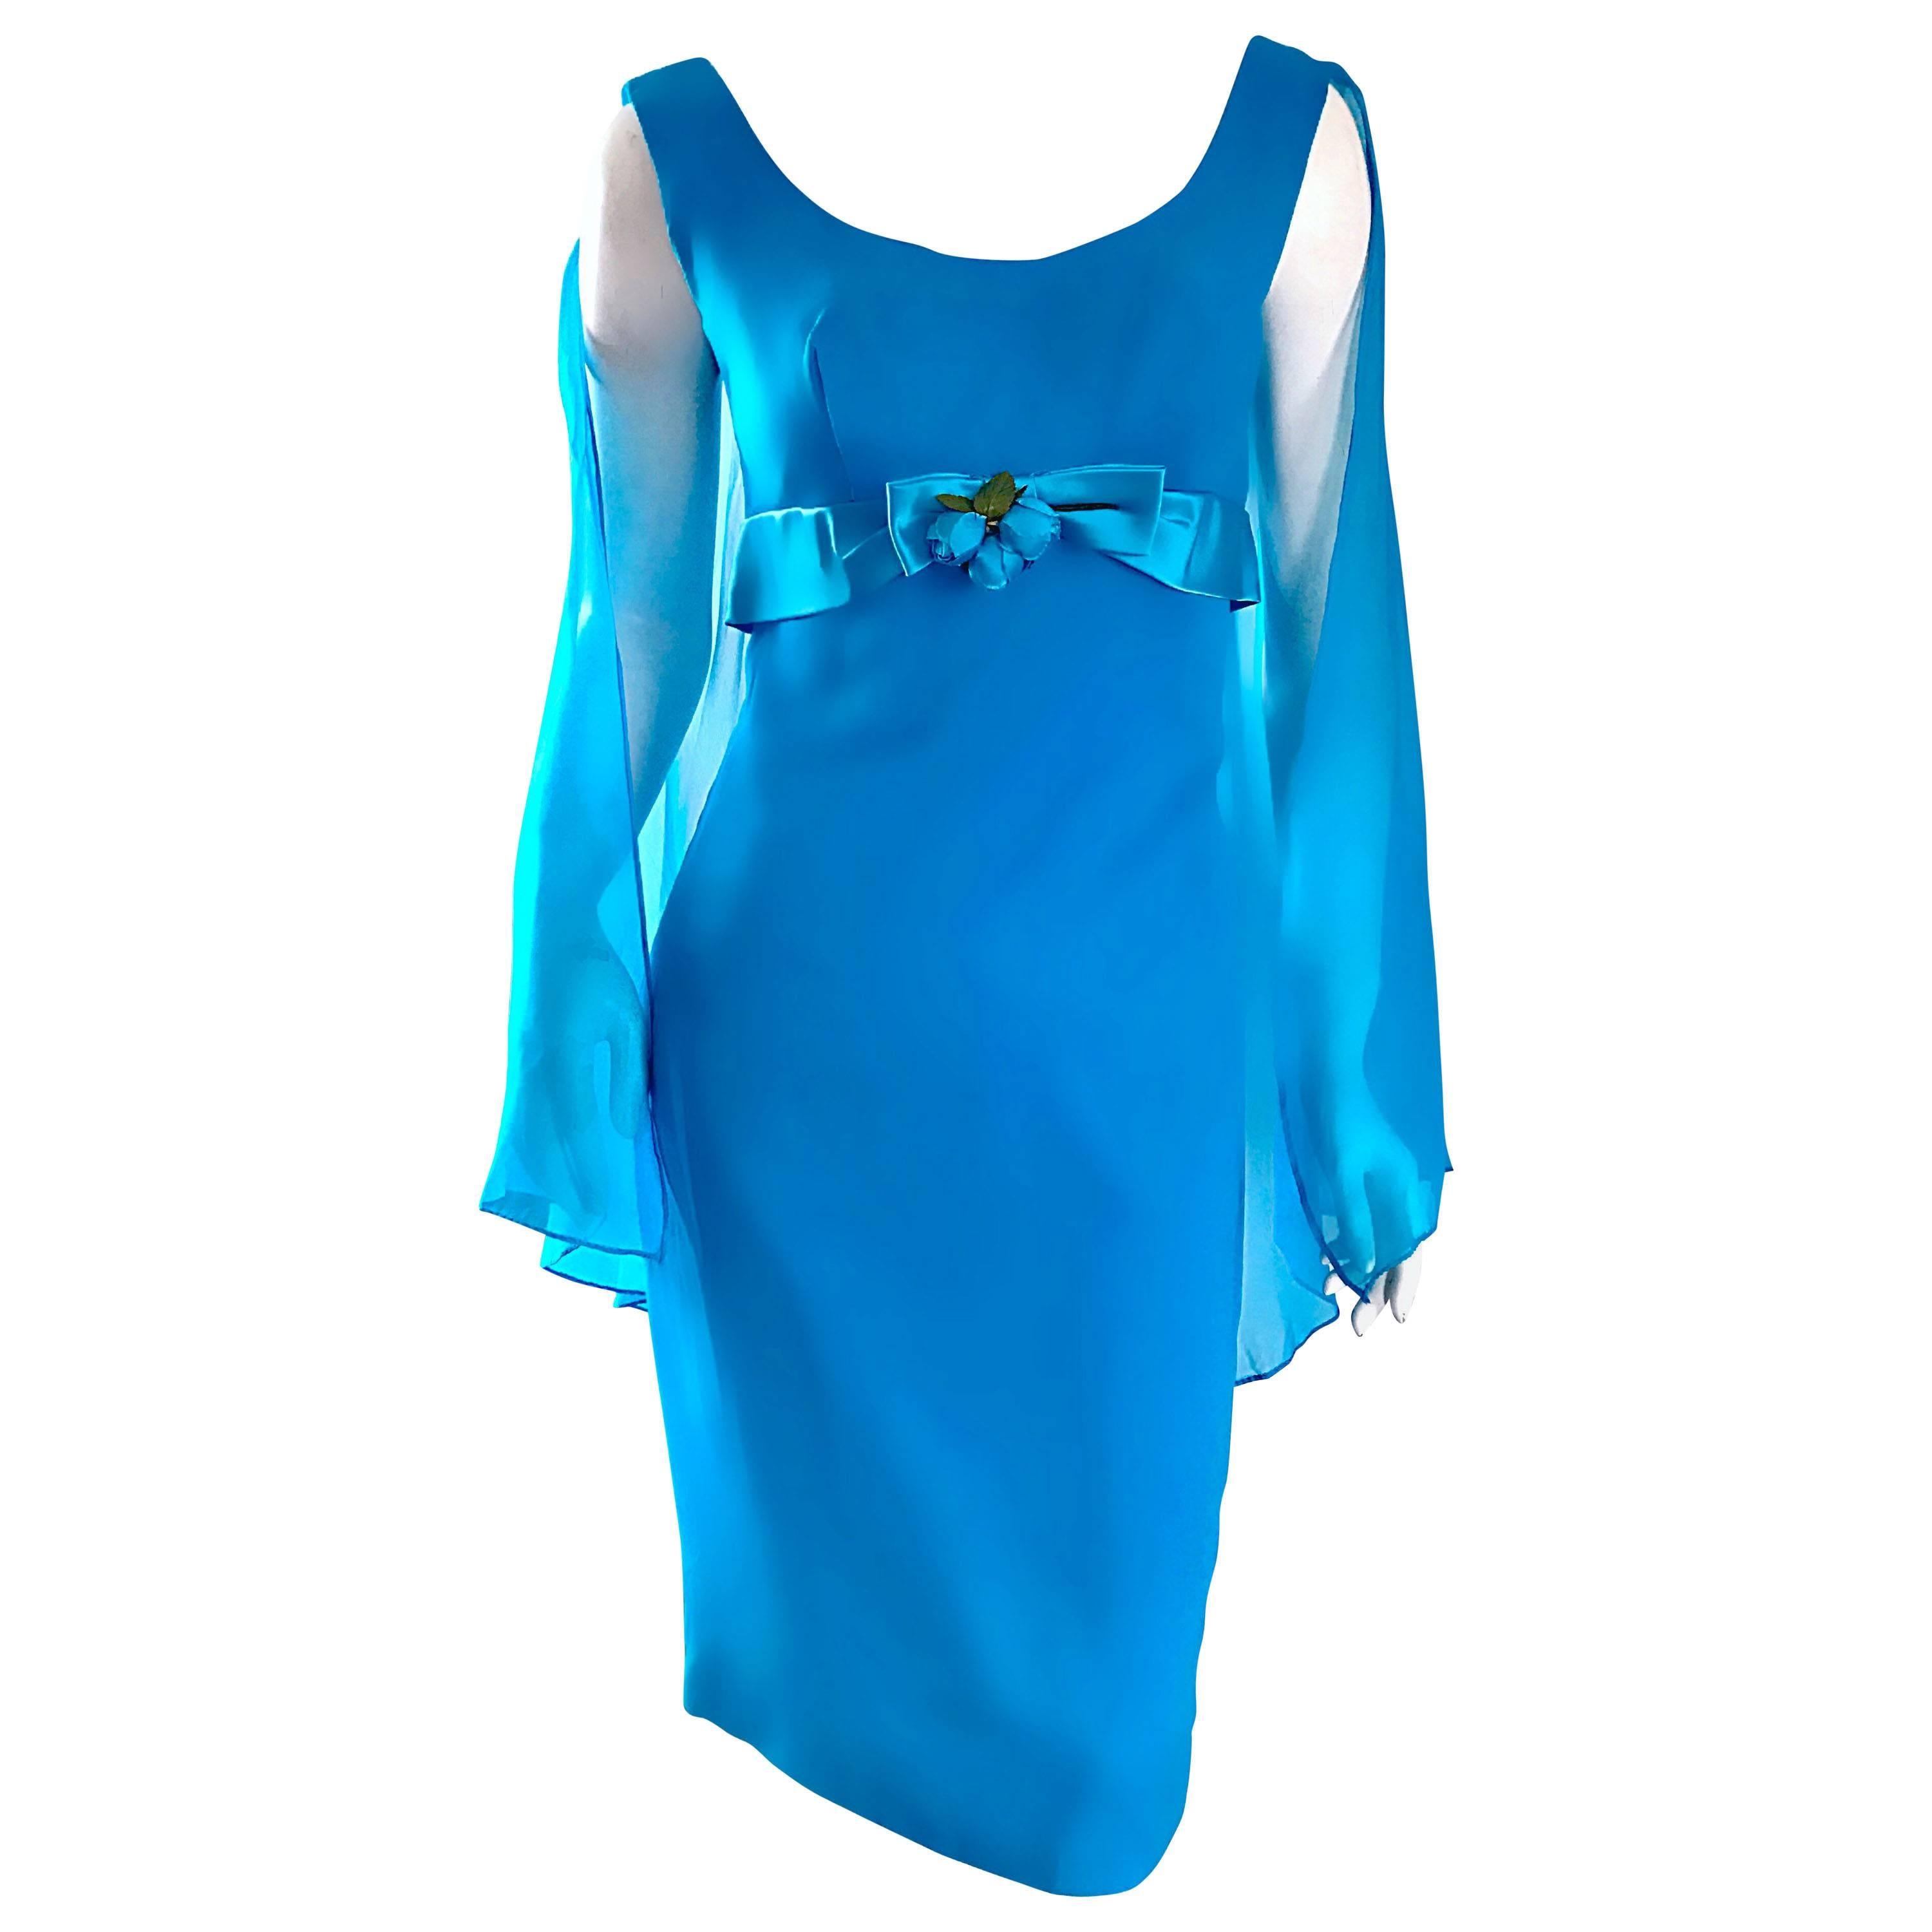 Amazing 1960s Turquoise Blue Chiffon Vintage Wiggle 60s Dress w/ Attached Cape For Sale